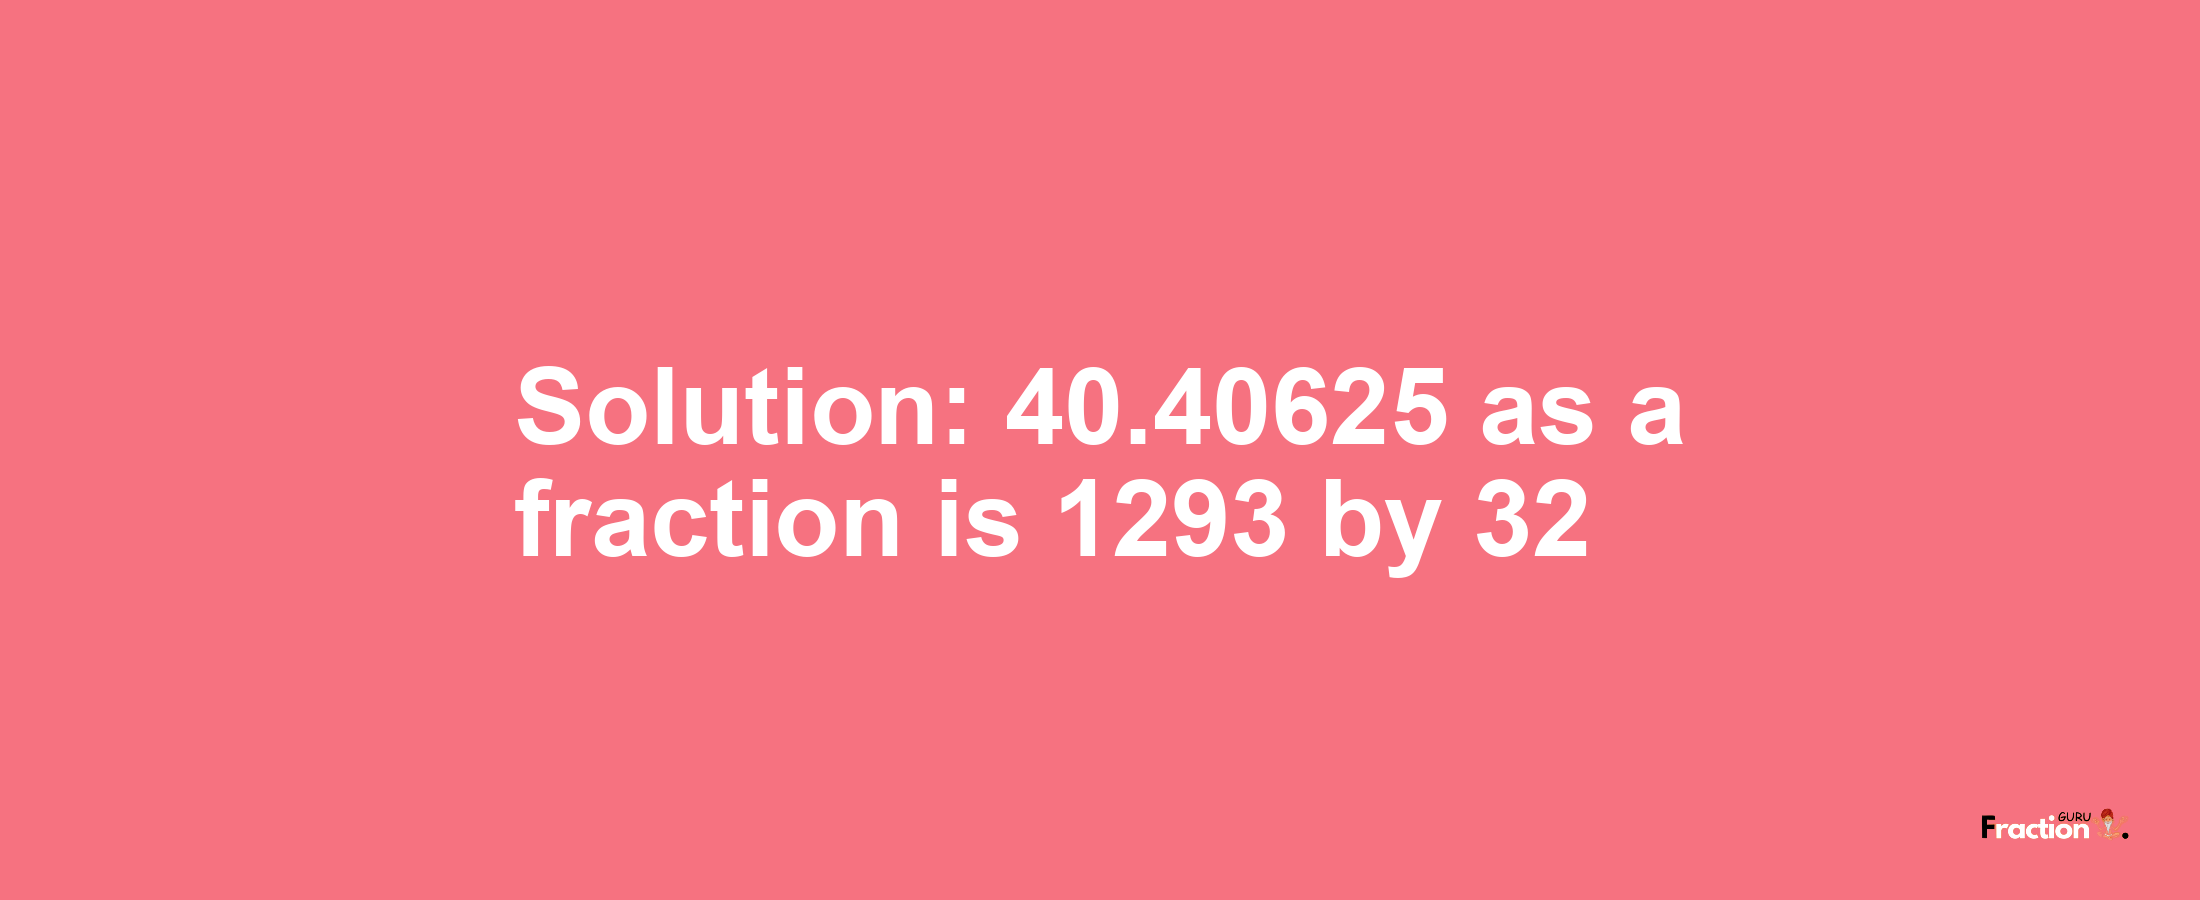 Solution:40.40625 as a fraction is 1293/32